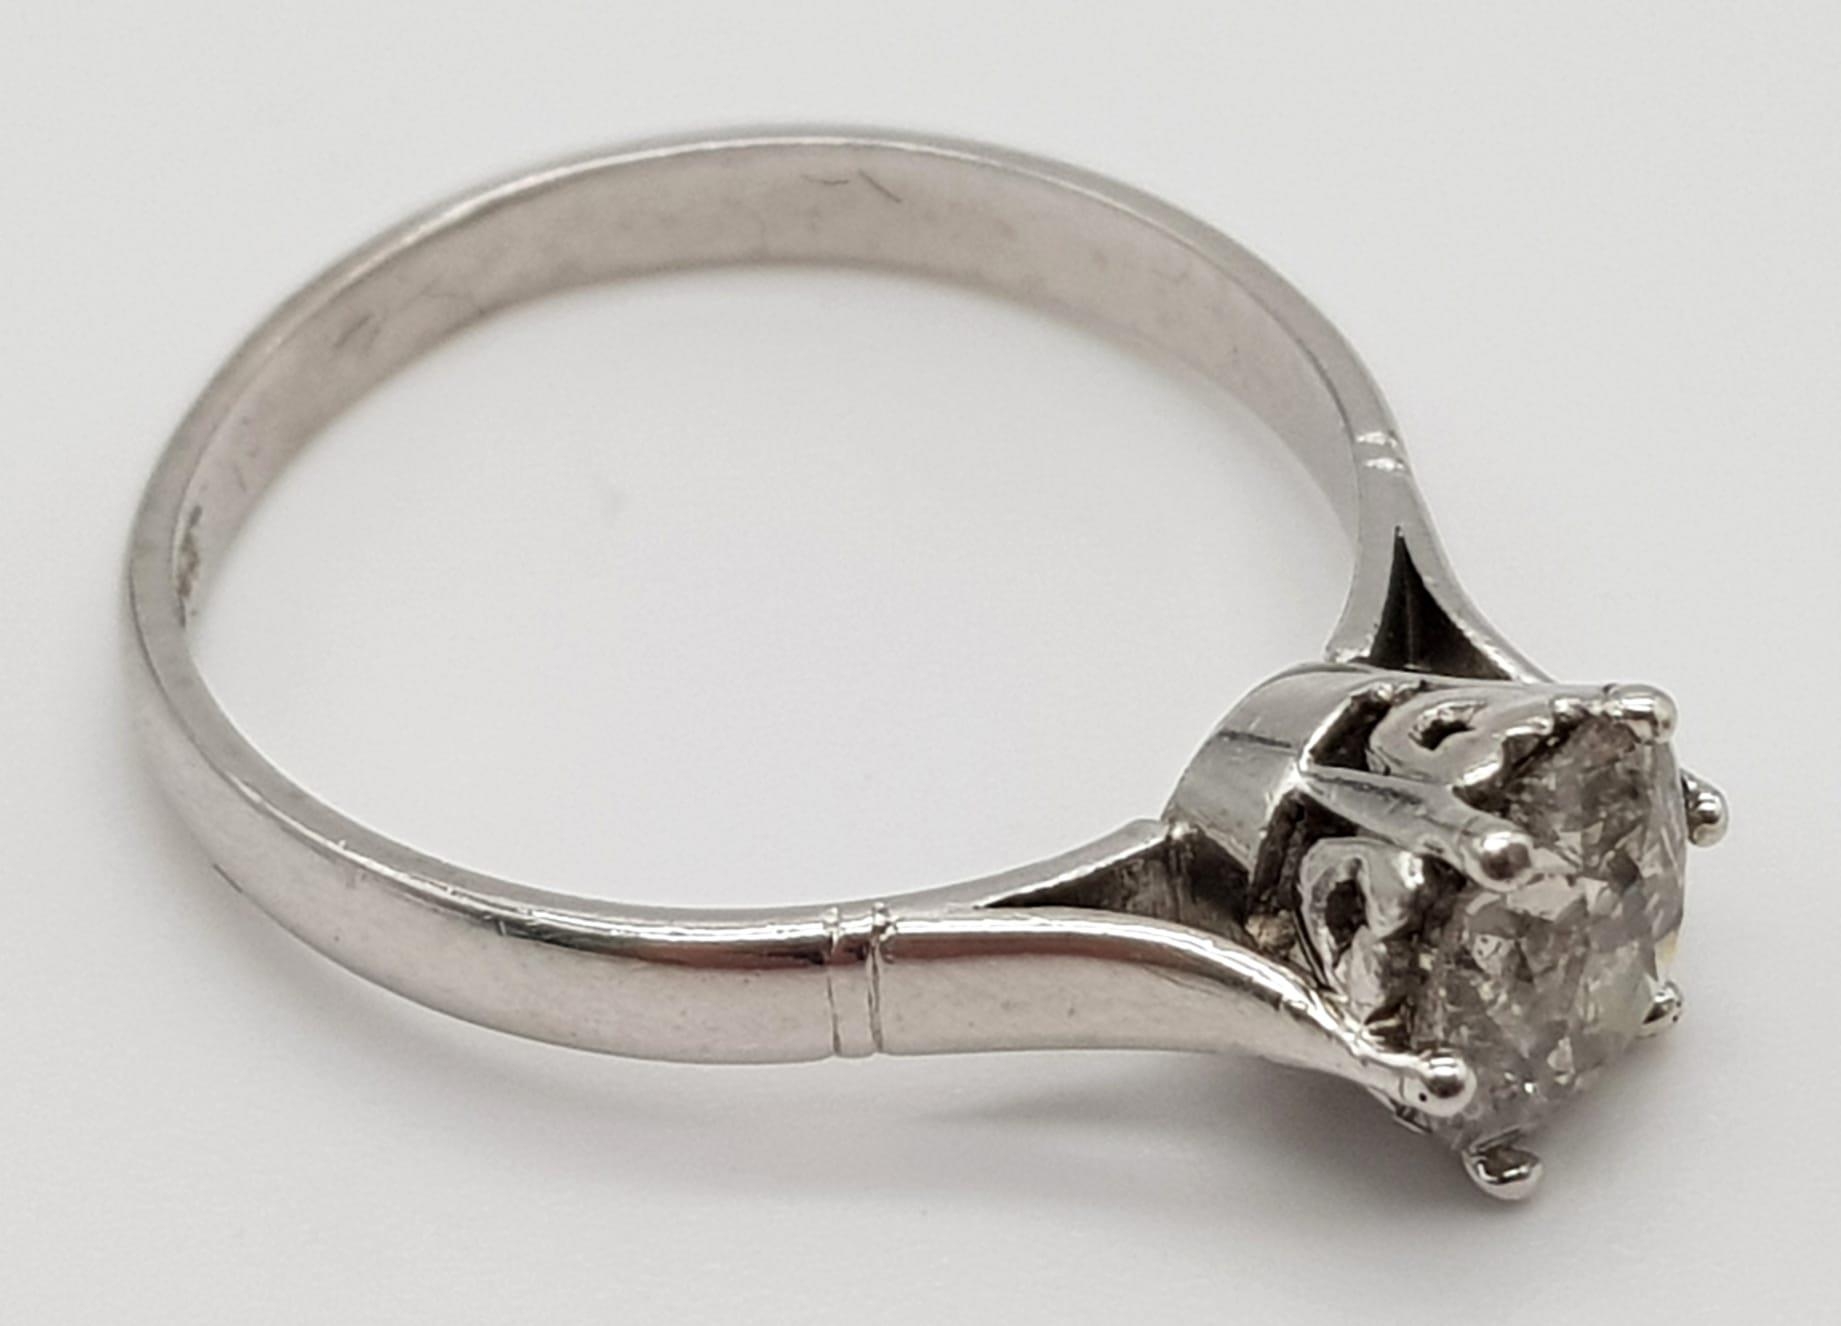 PLATINUM DIAMOND SOLIATIRE RING. 1.30CT APPROX DIAMOND. TOTAL WEIGHT 9.5G SIZE R - Image 3 of 6